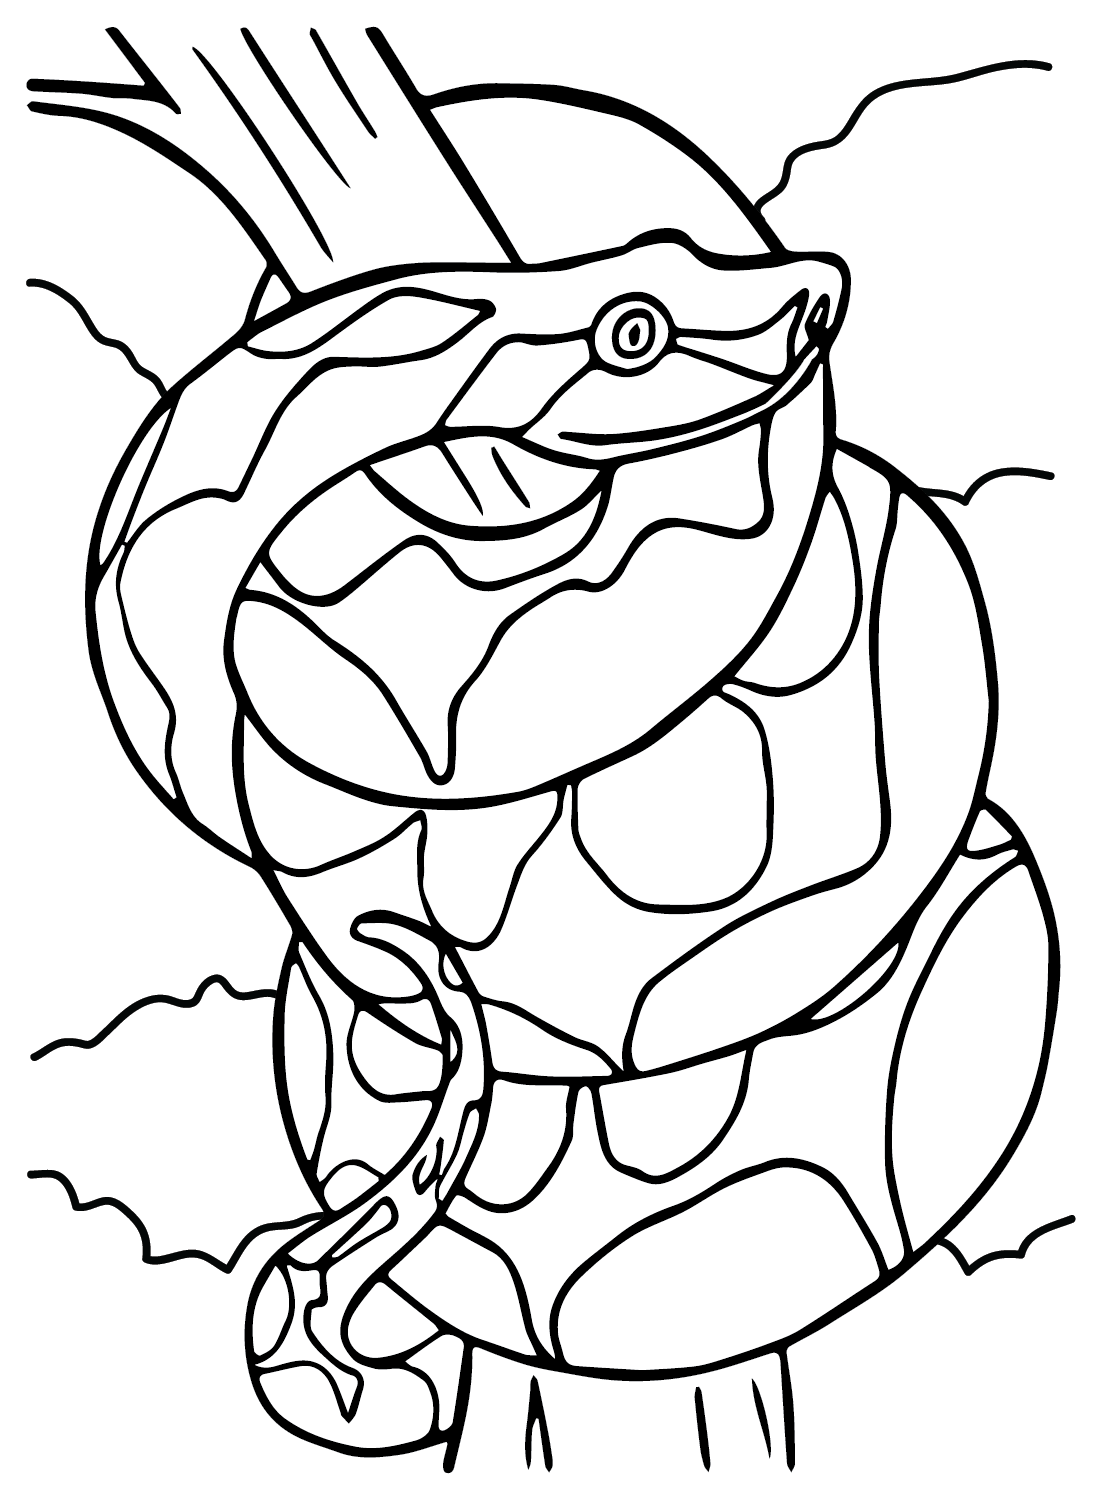 Anaconda Snake Pictures Coloring Page from Anaconda